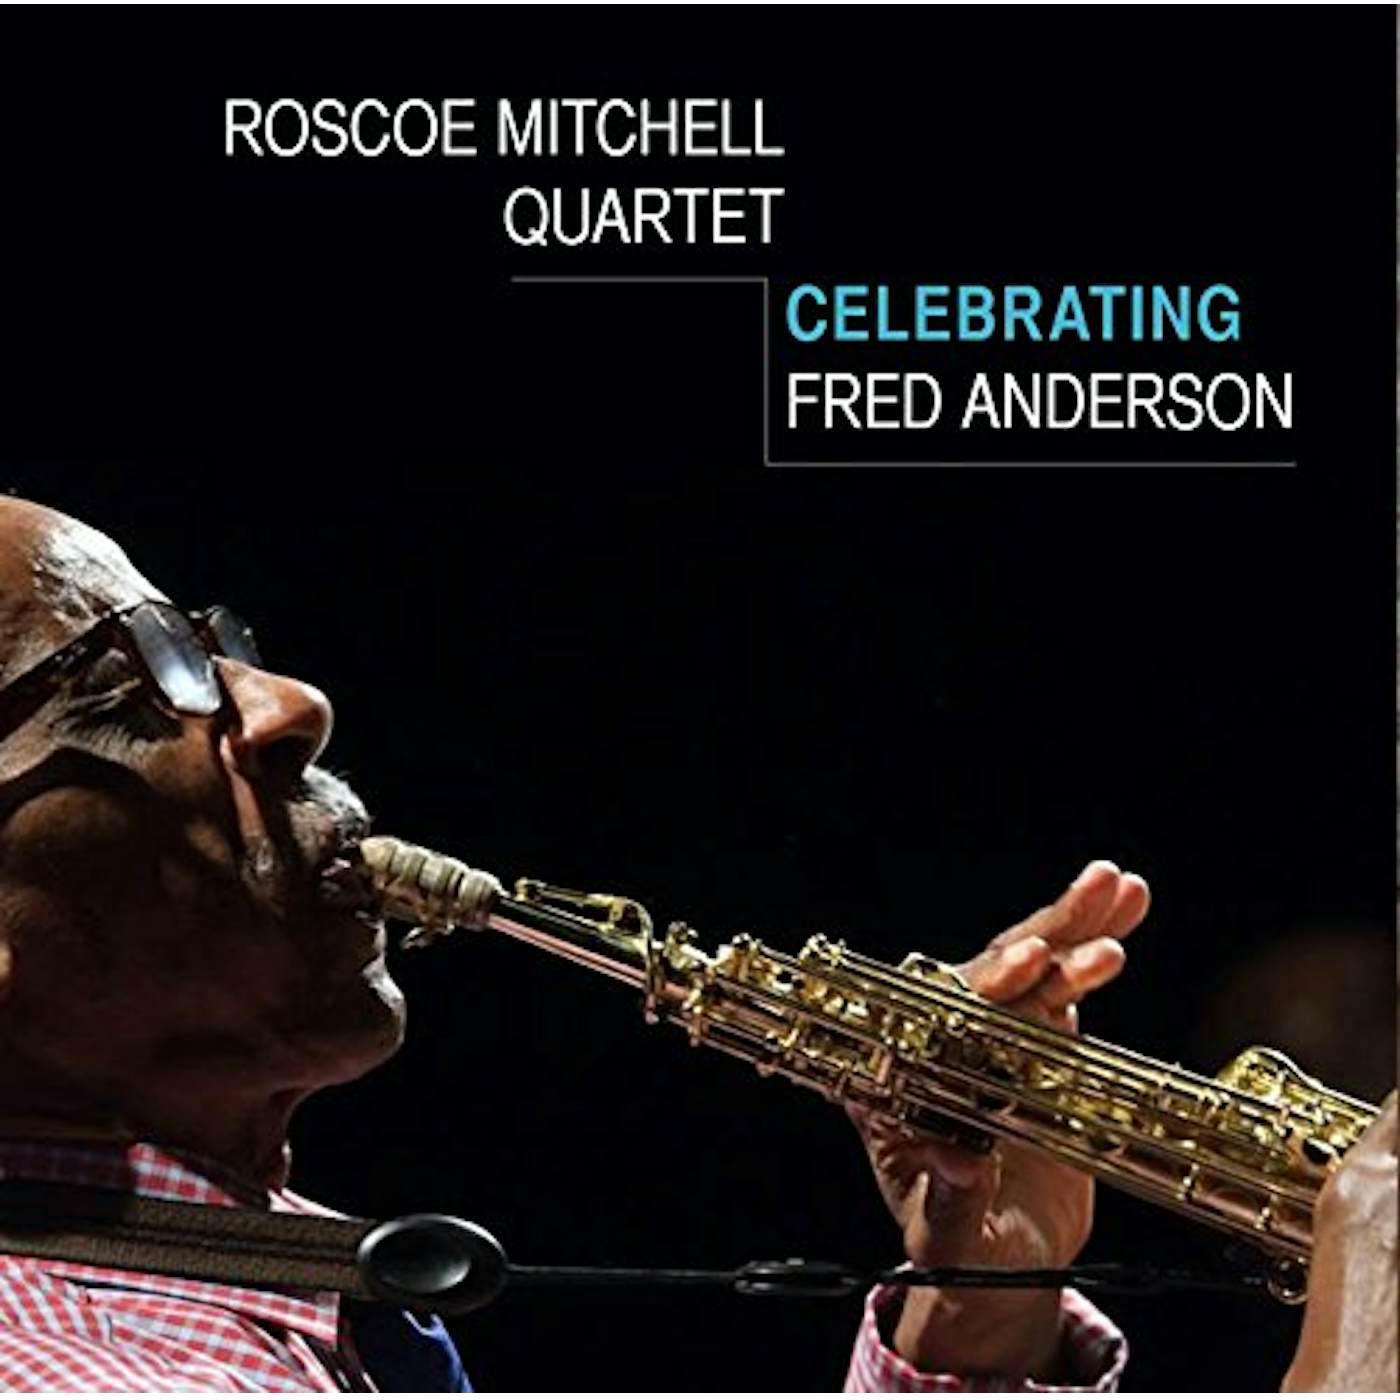 Roscoe Mitchell CELEBRATING FRED ANDERSON CD